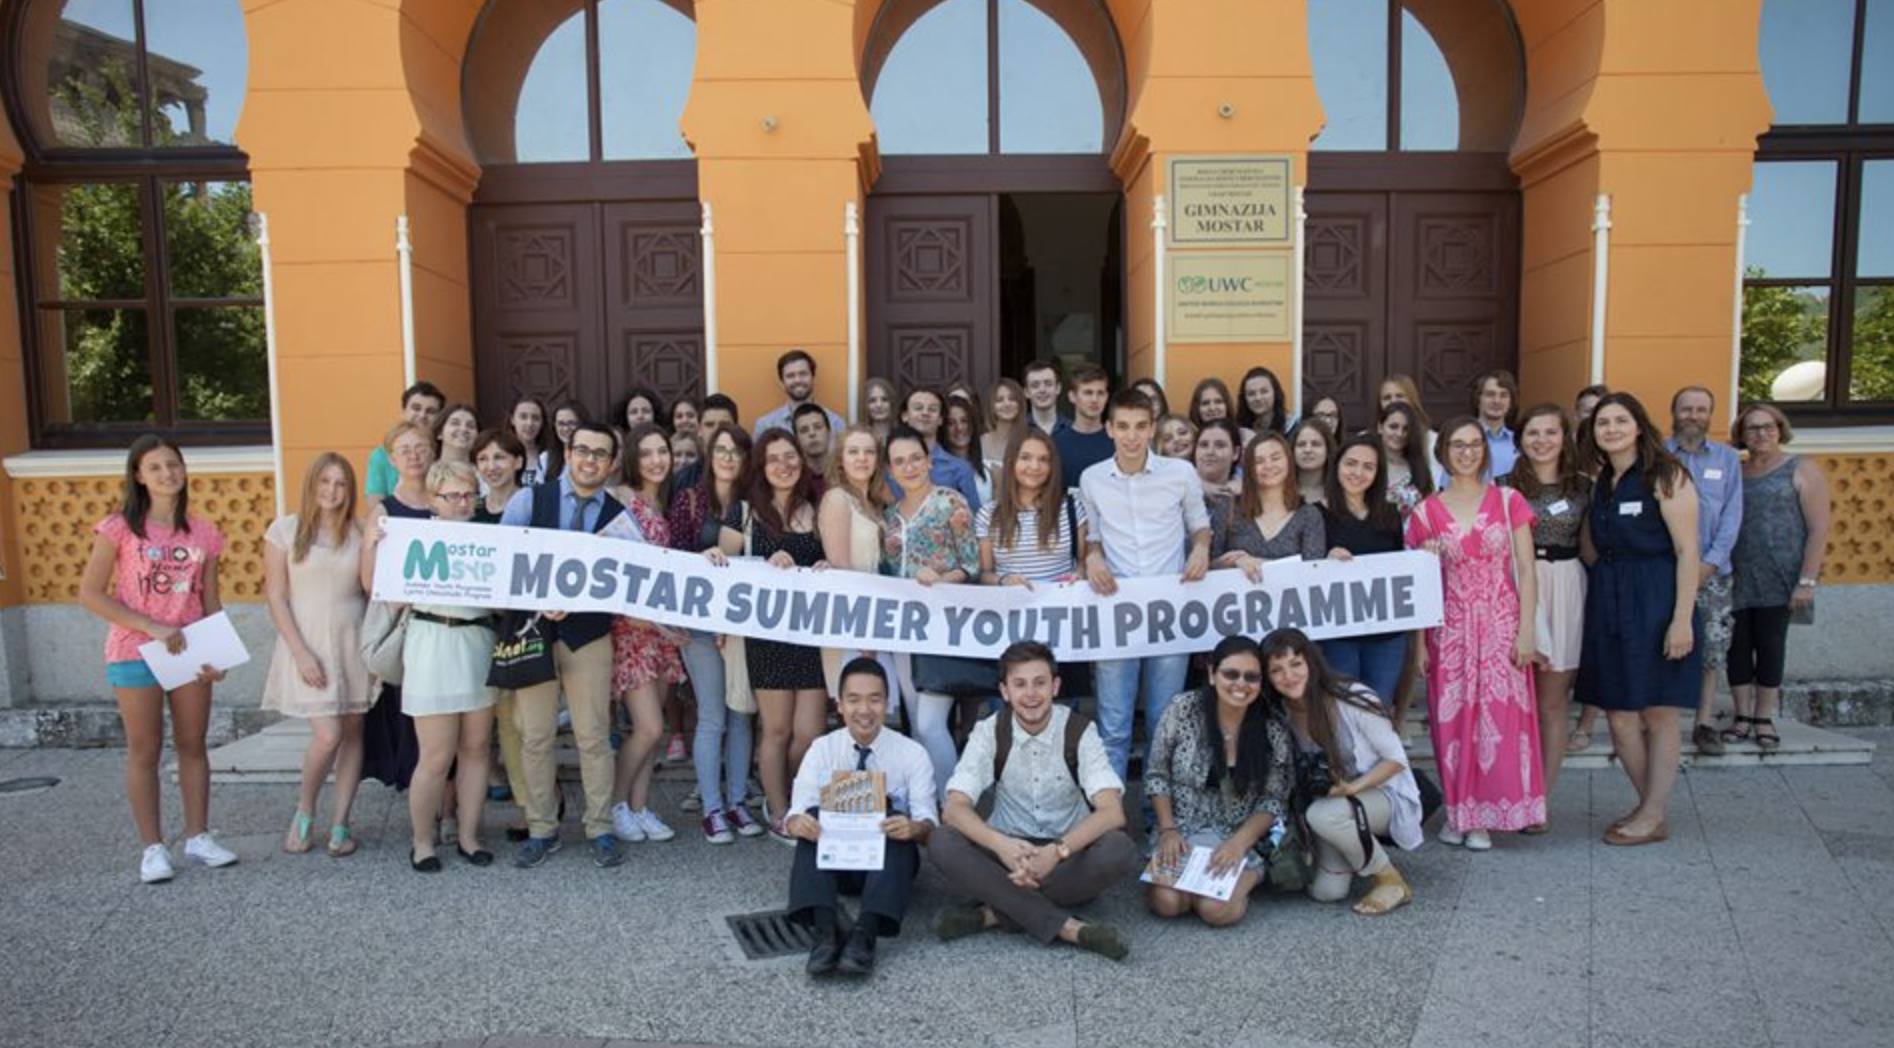 Students at the Mostar Summer Youth Program (2015)